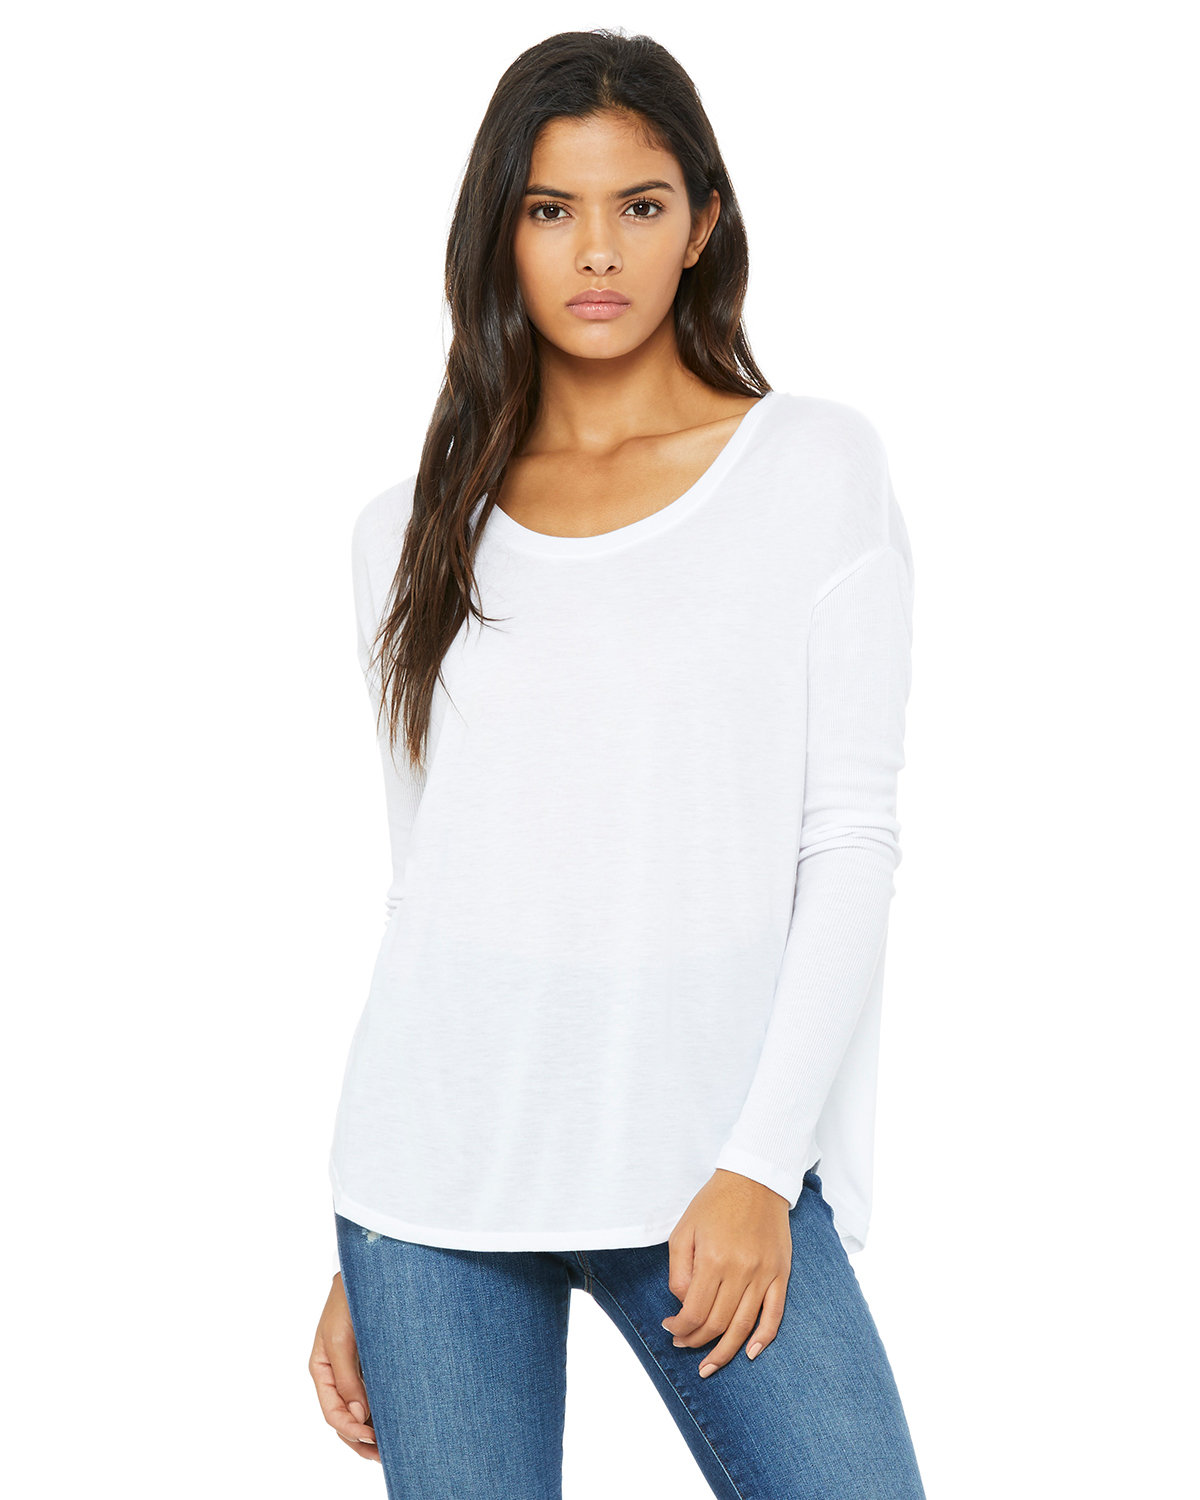 Bella + Canvas Ladies' Flowy Long-Sleeve T-Shirt with 2x1 Sleeves WHITE 